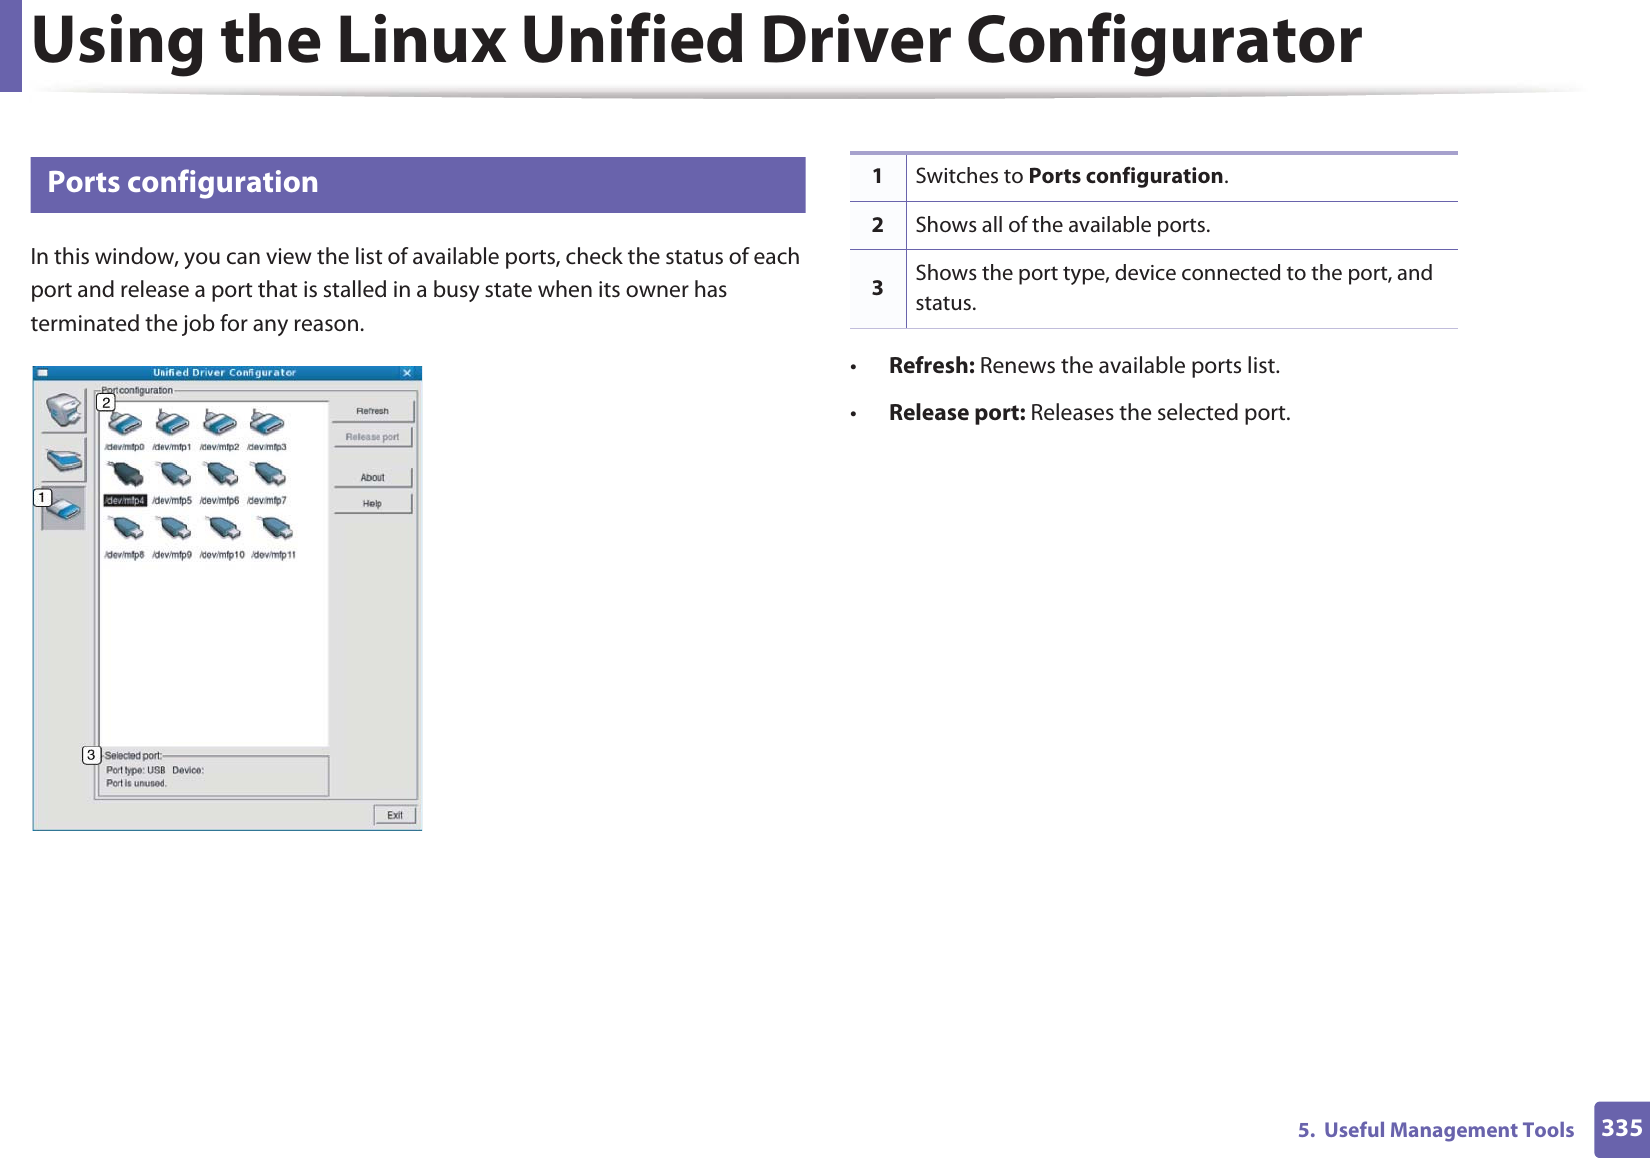 Using the Linux Unified Driver Configurator3355.  Useful Management Tools13 Ports configurationIn this window, you can view the list of available ports, check the status of each port and release a port that is stalled in a busy state when its owner has terminated the job for any reason.•Refresh: Renews the available ports list.•Release port: Releases the selected port.1Switches to Ports configuration.2Shows all of the available ports.3Shows the port type, device connected to the port, and status.